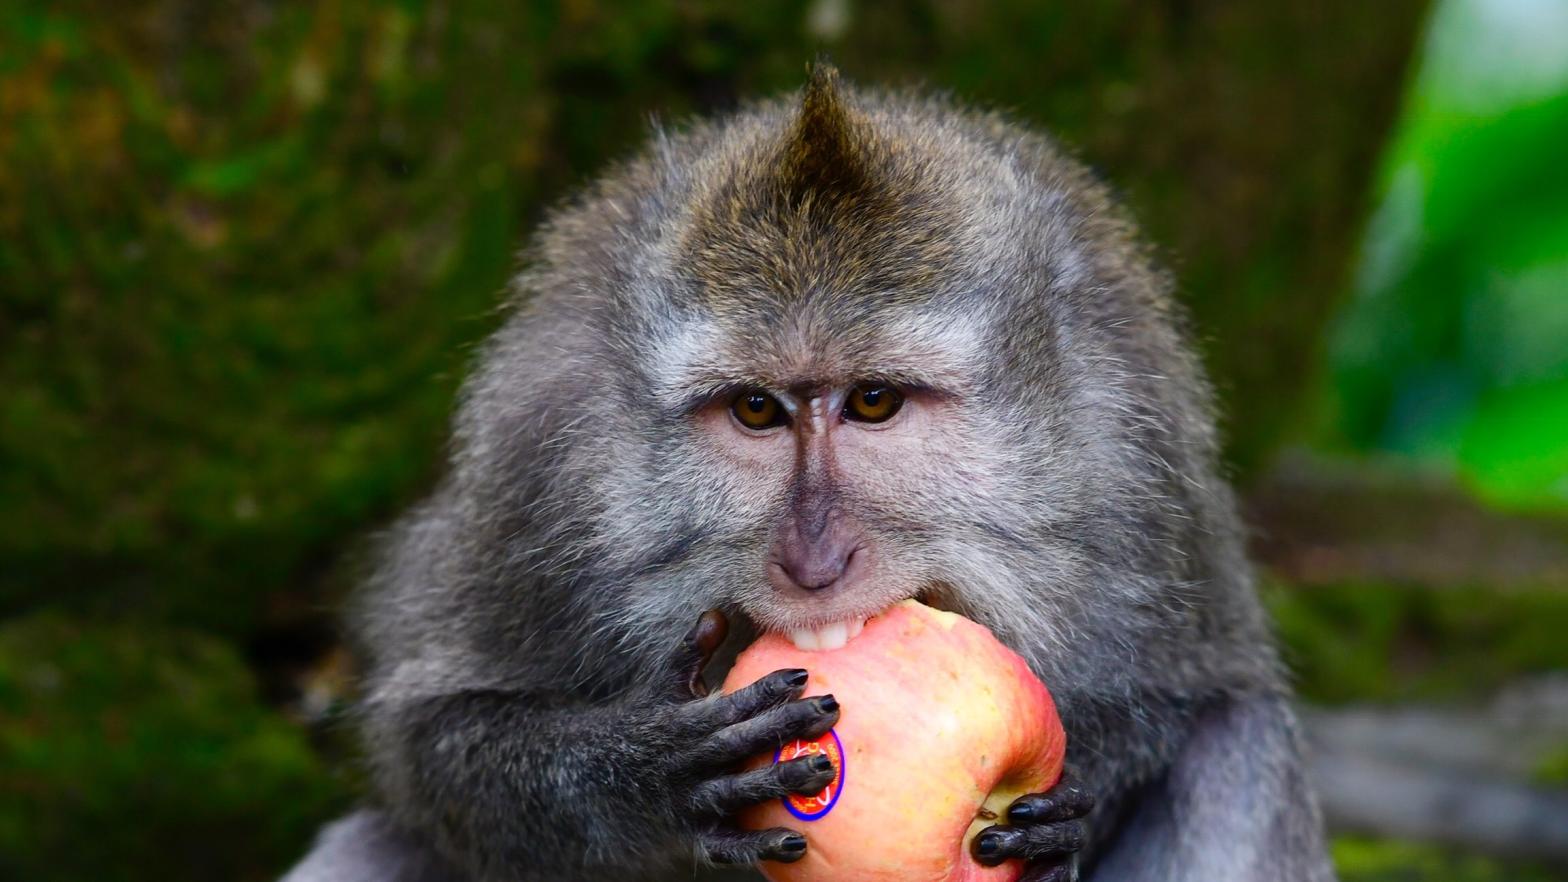 A Balinese long-tailed monkeys, Macaca fascicularis, eats an apple in the Sacred Monkey Forest in Ubud, Bali, Indonesia, on November 16, 2018.  (Photo: Gabriel Bouys / AFP, Getty Images)